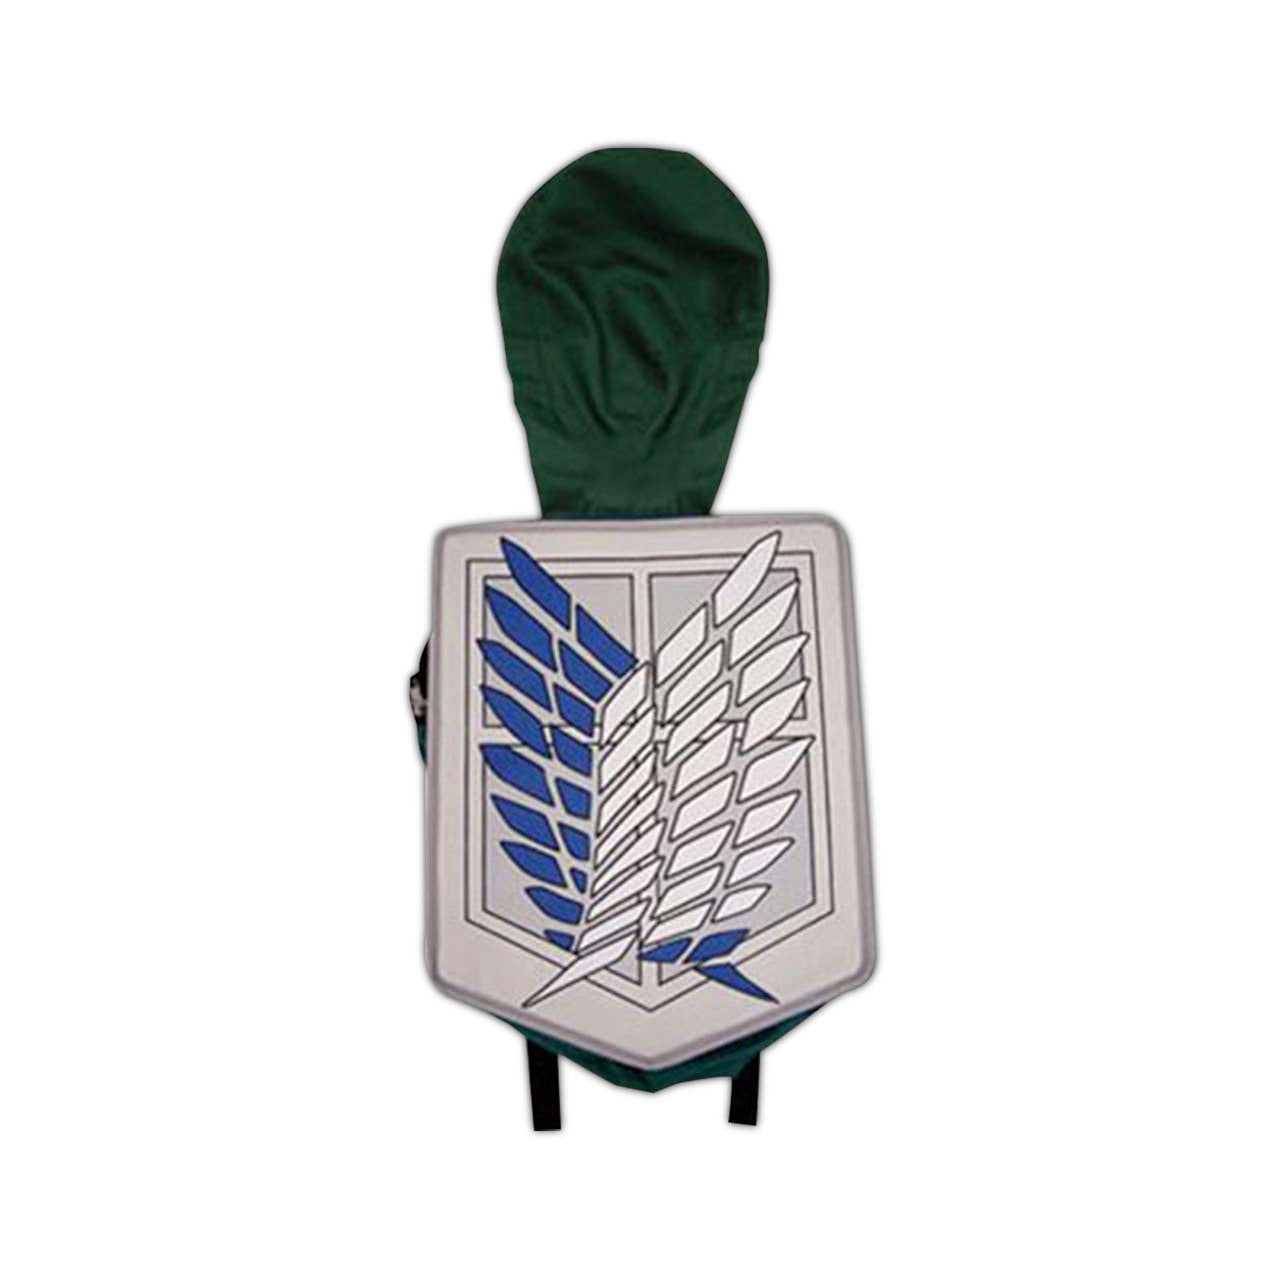 Attack on Titan - Scout Regiment Backpack image count 1